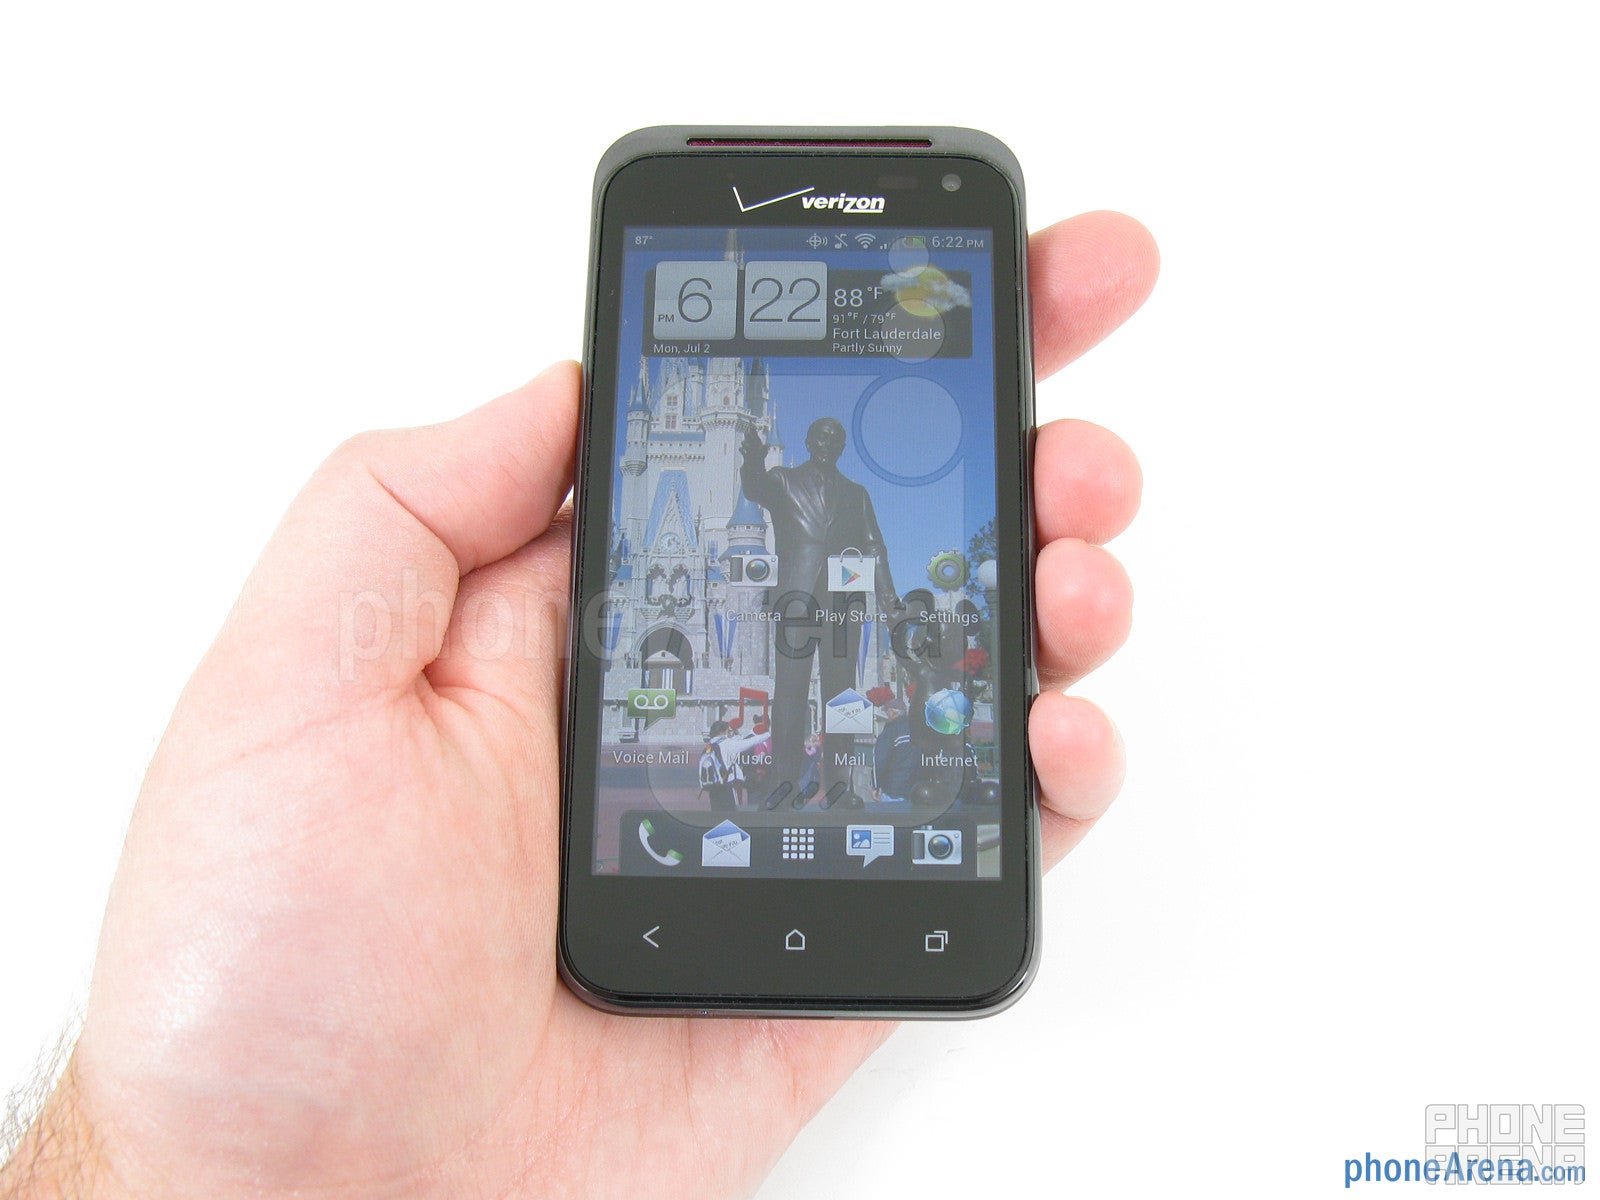 HTC Droid Incredible 4G LTE Review